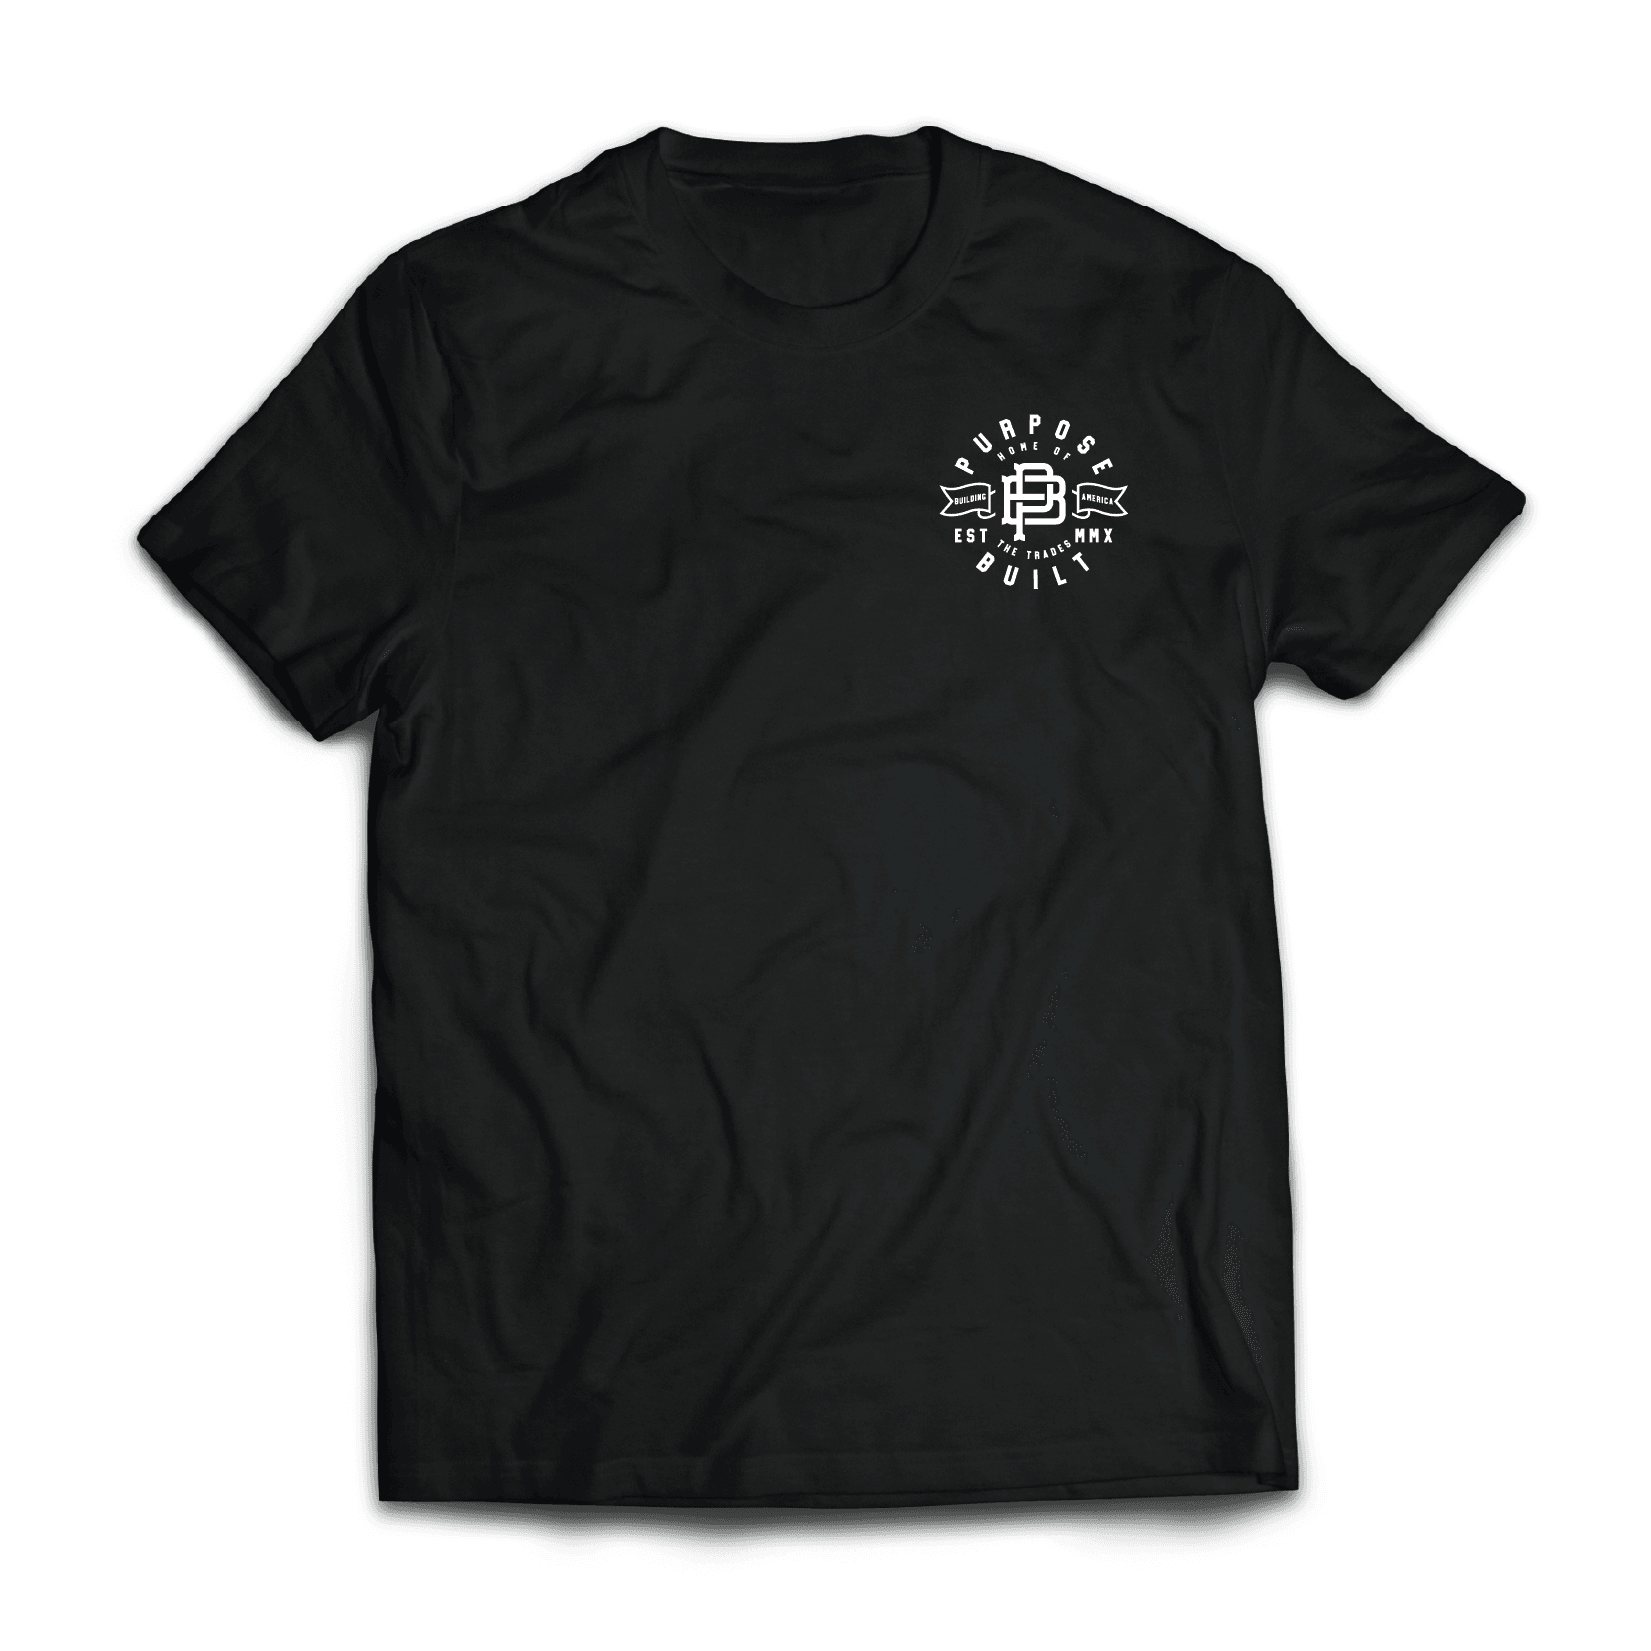 Earn your Freedom Tee, Black - Purpose-Built / Home of the Trades